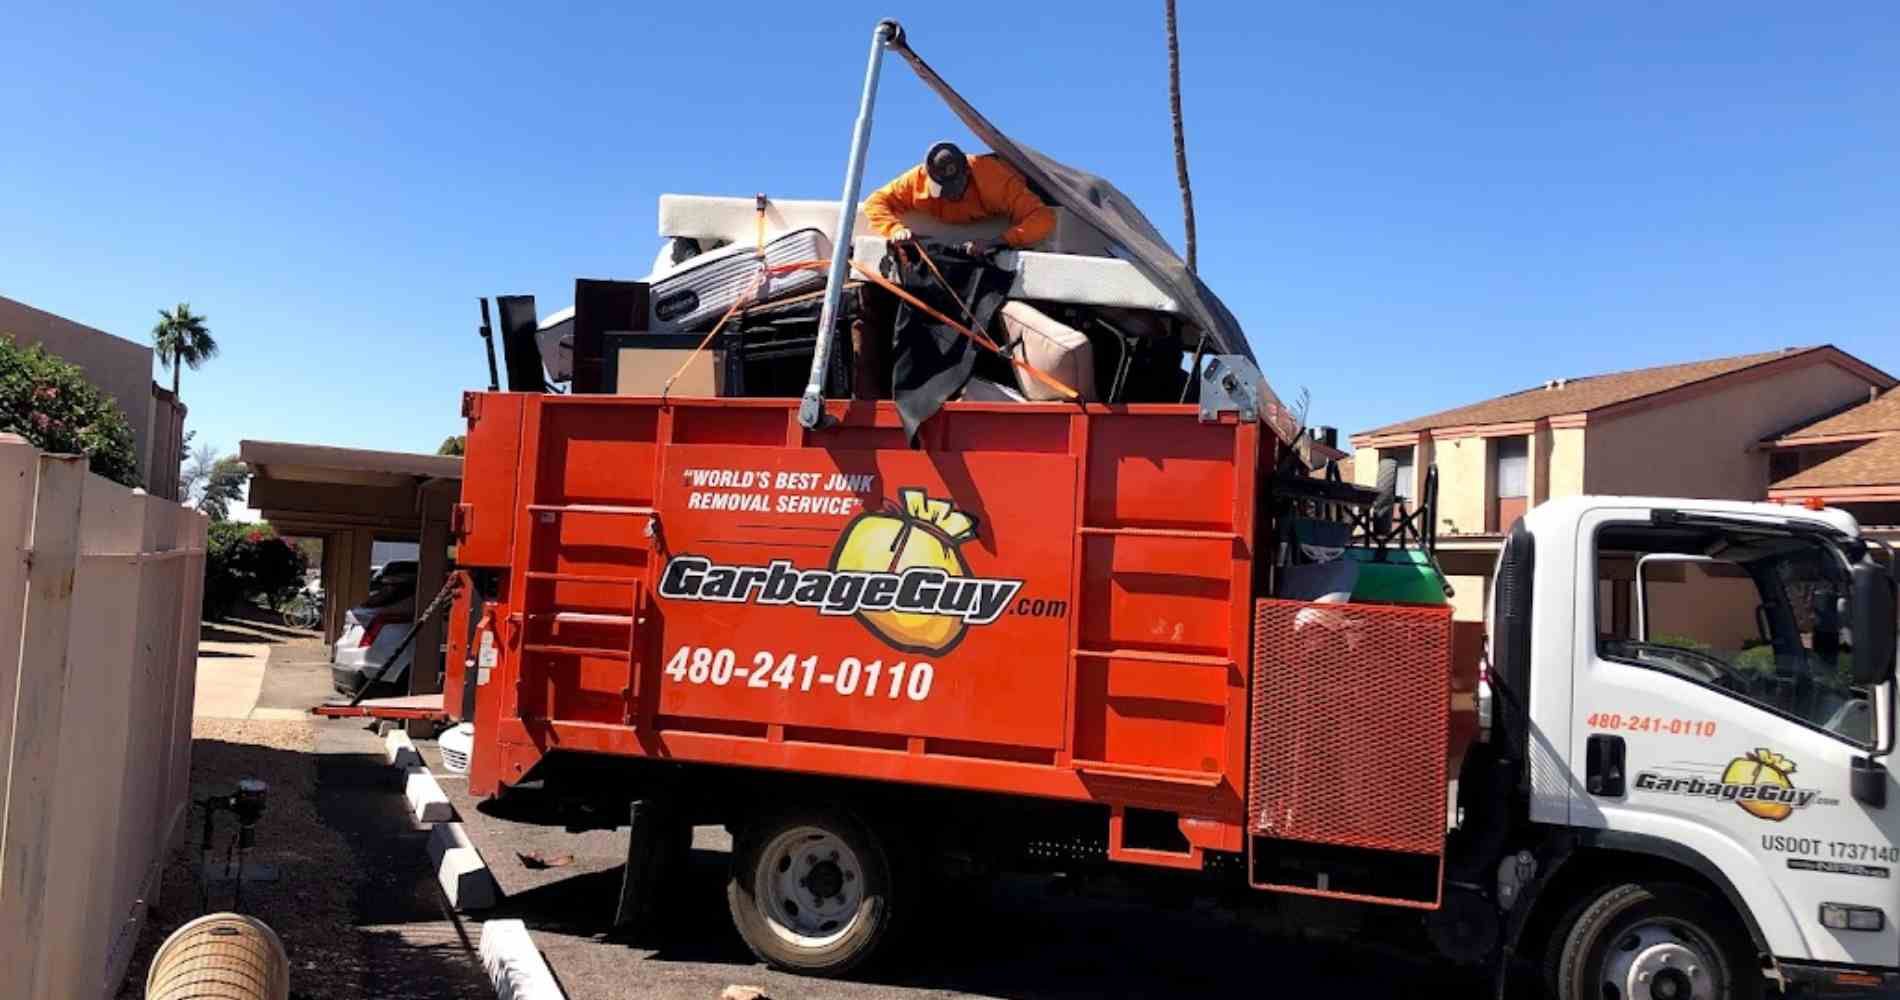 #1 for Furniture Removal in Goodyear, AZ With Over 1200 5-Star Reviews!